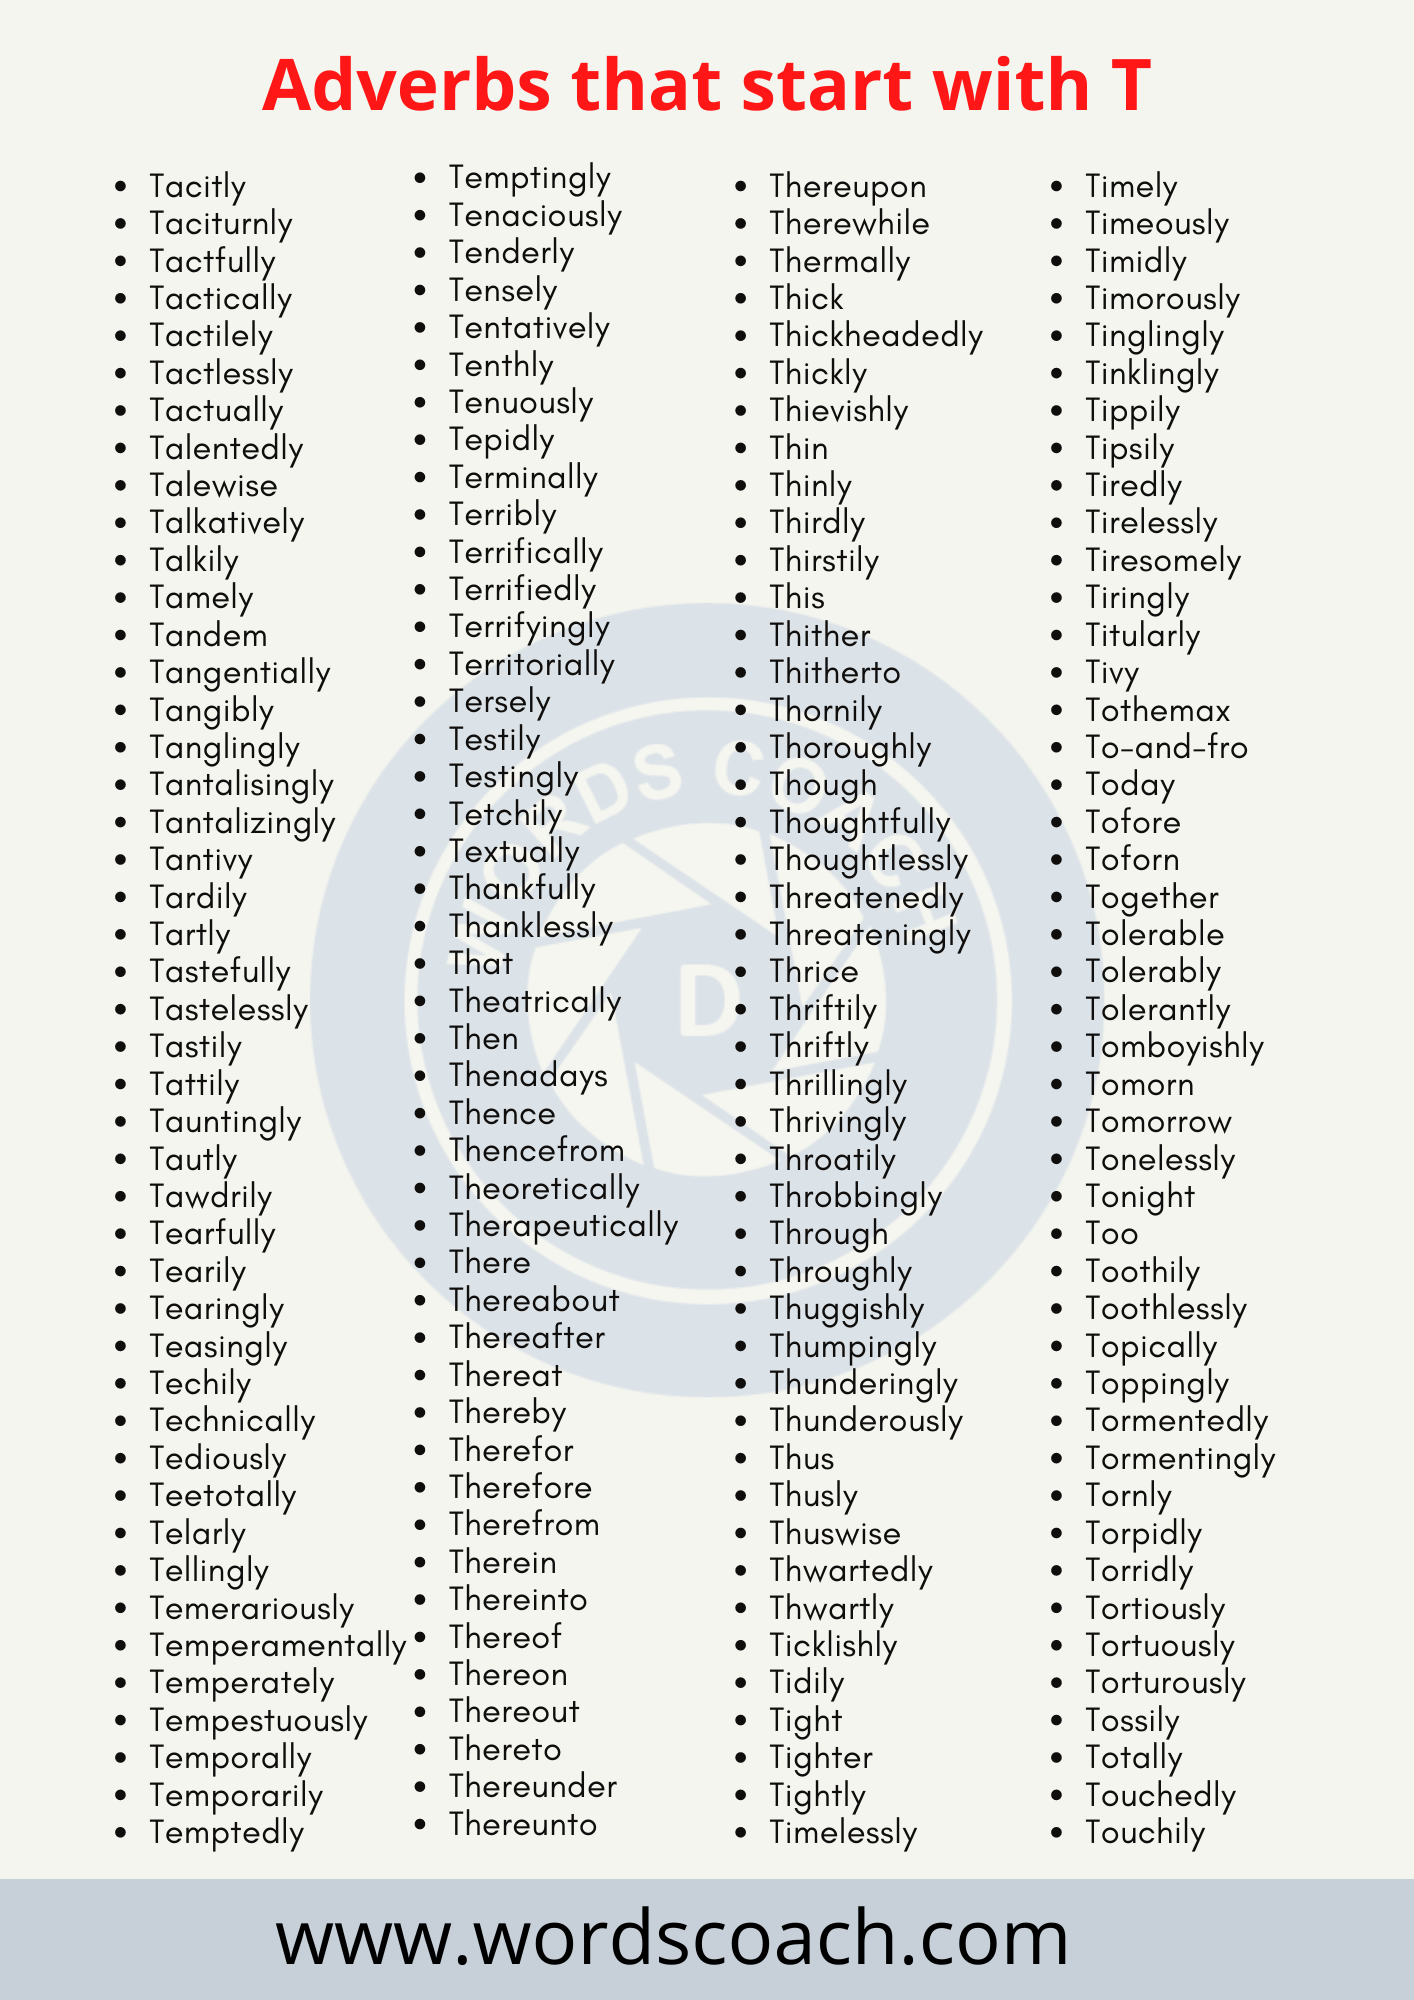 Adverbs that start with T - wordscoach.com